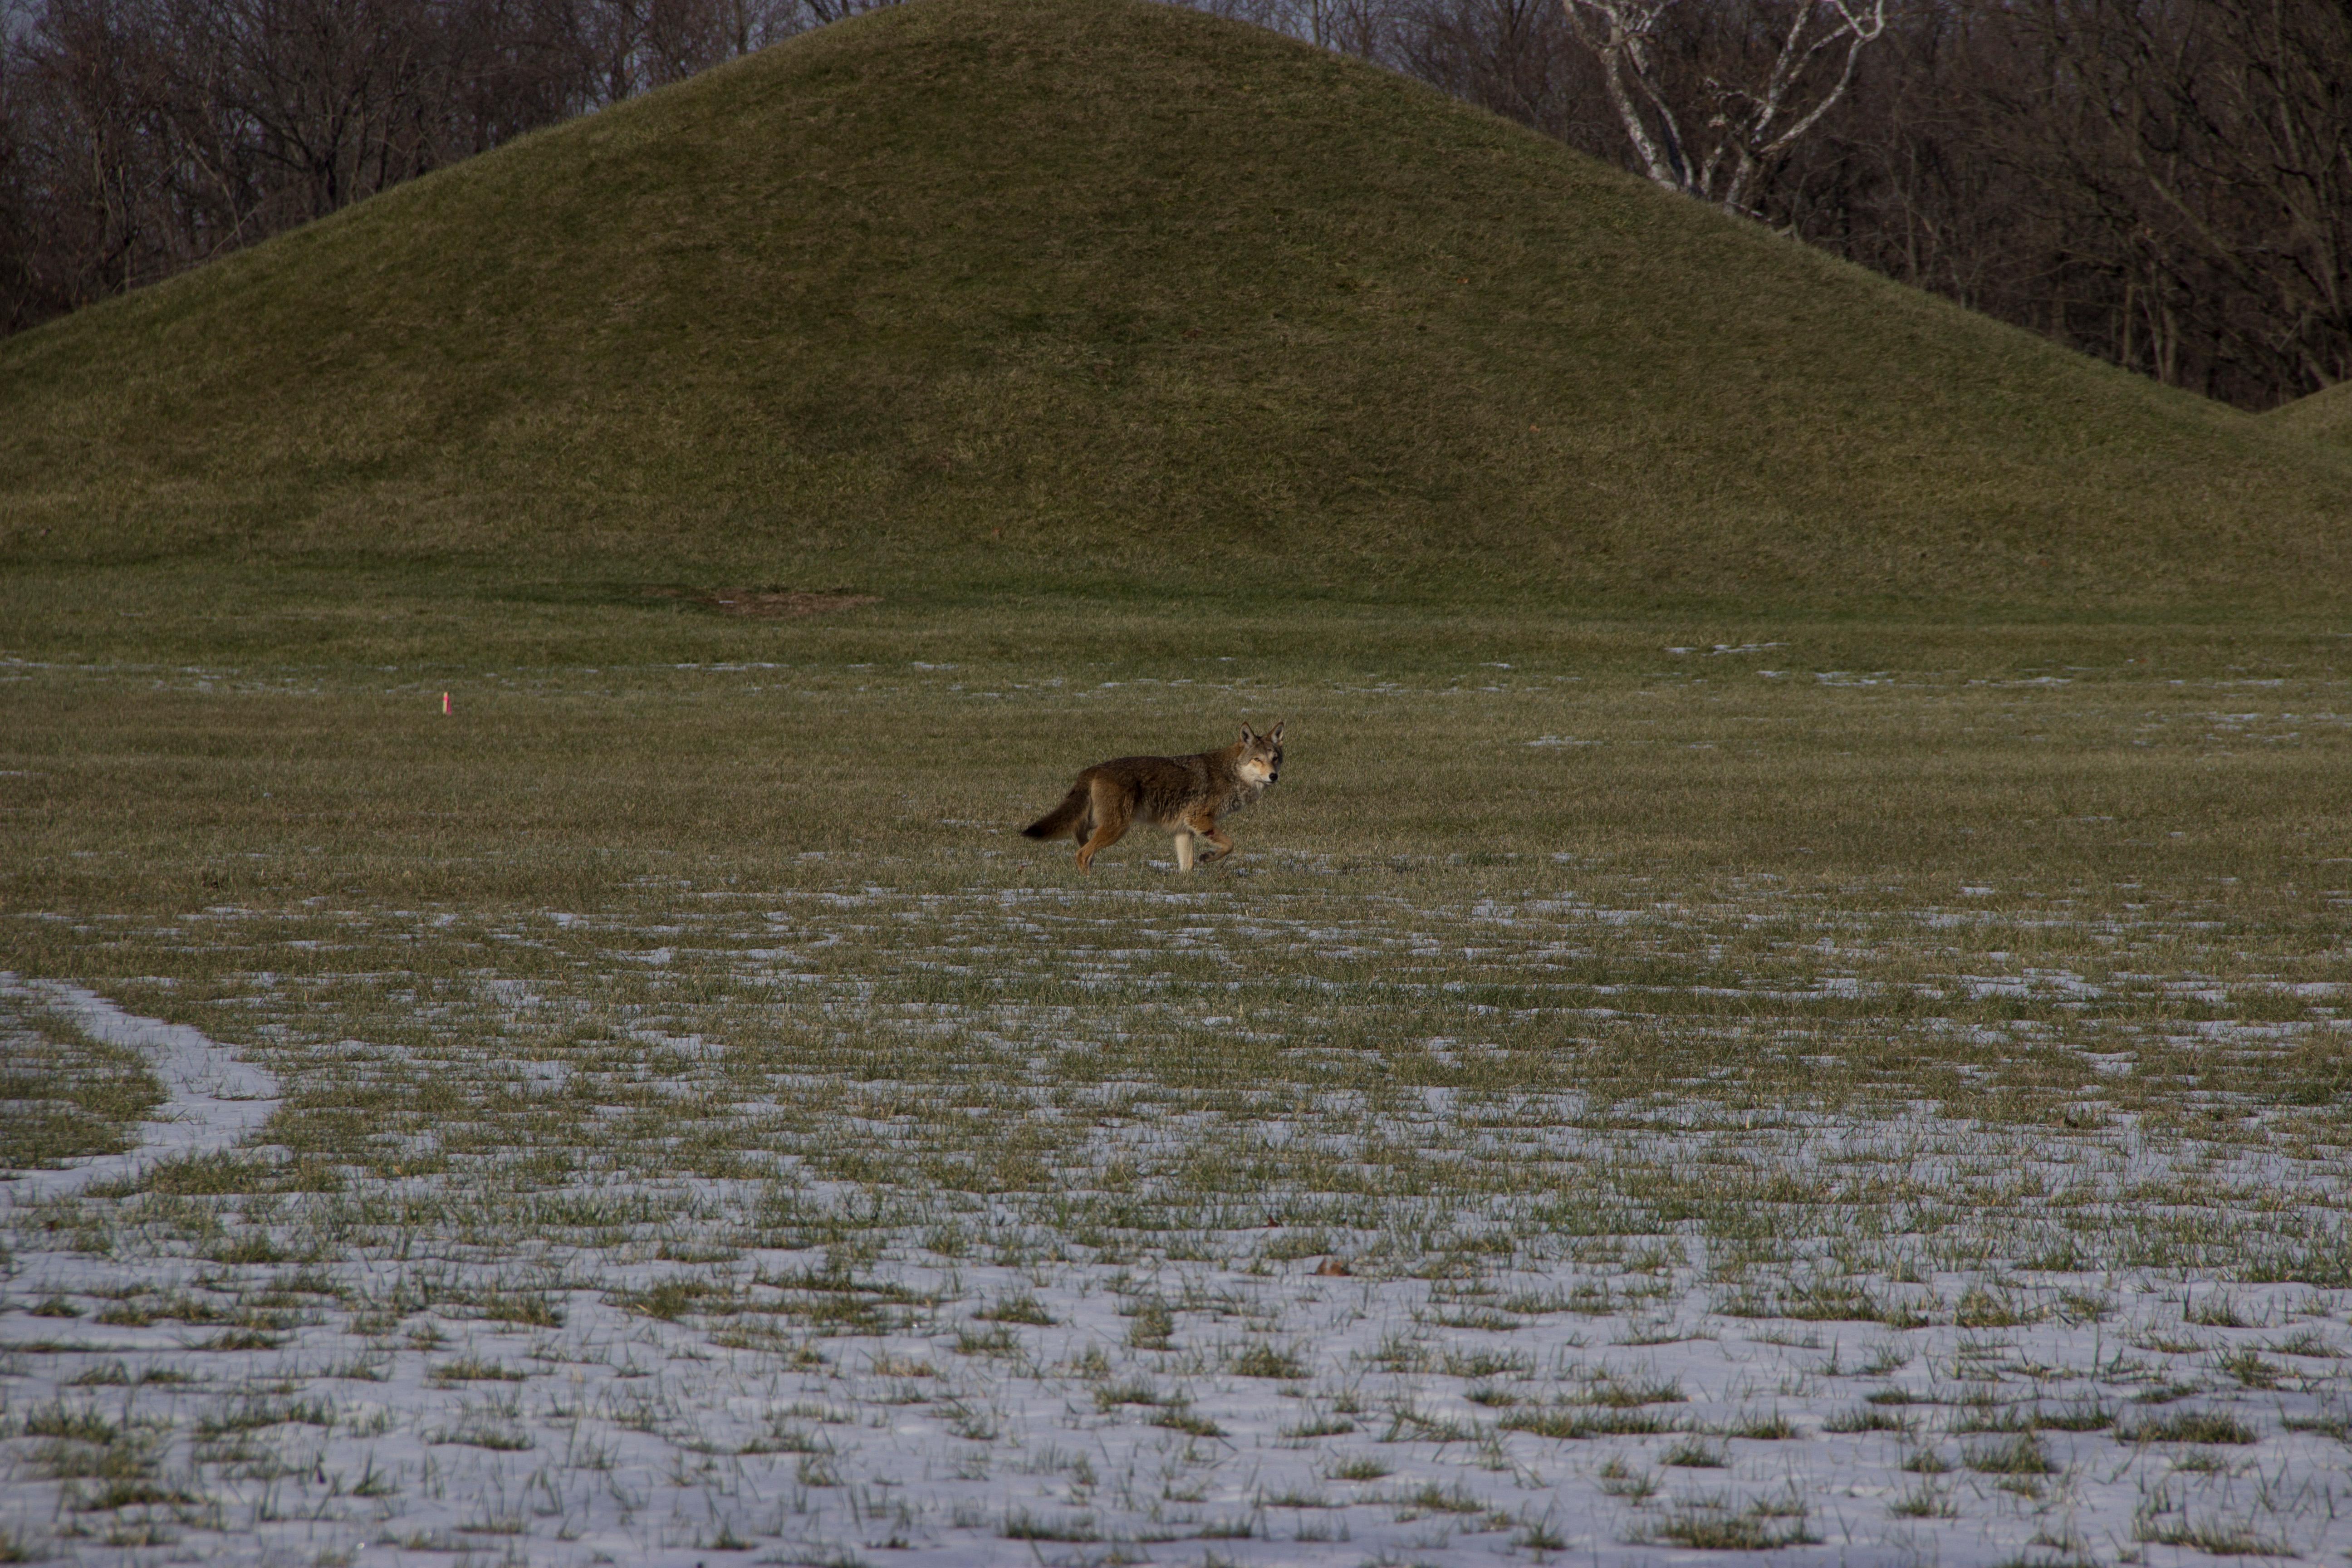 A gray coyote begins walking in the grass in front of a grass-covered mound